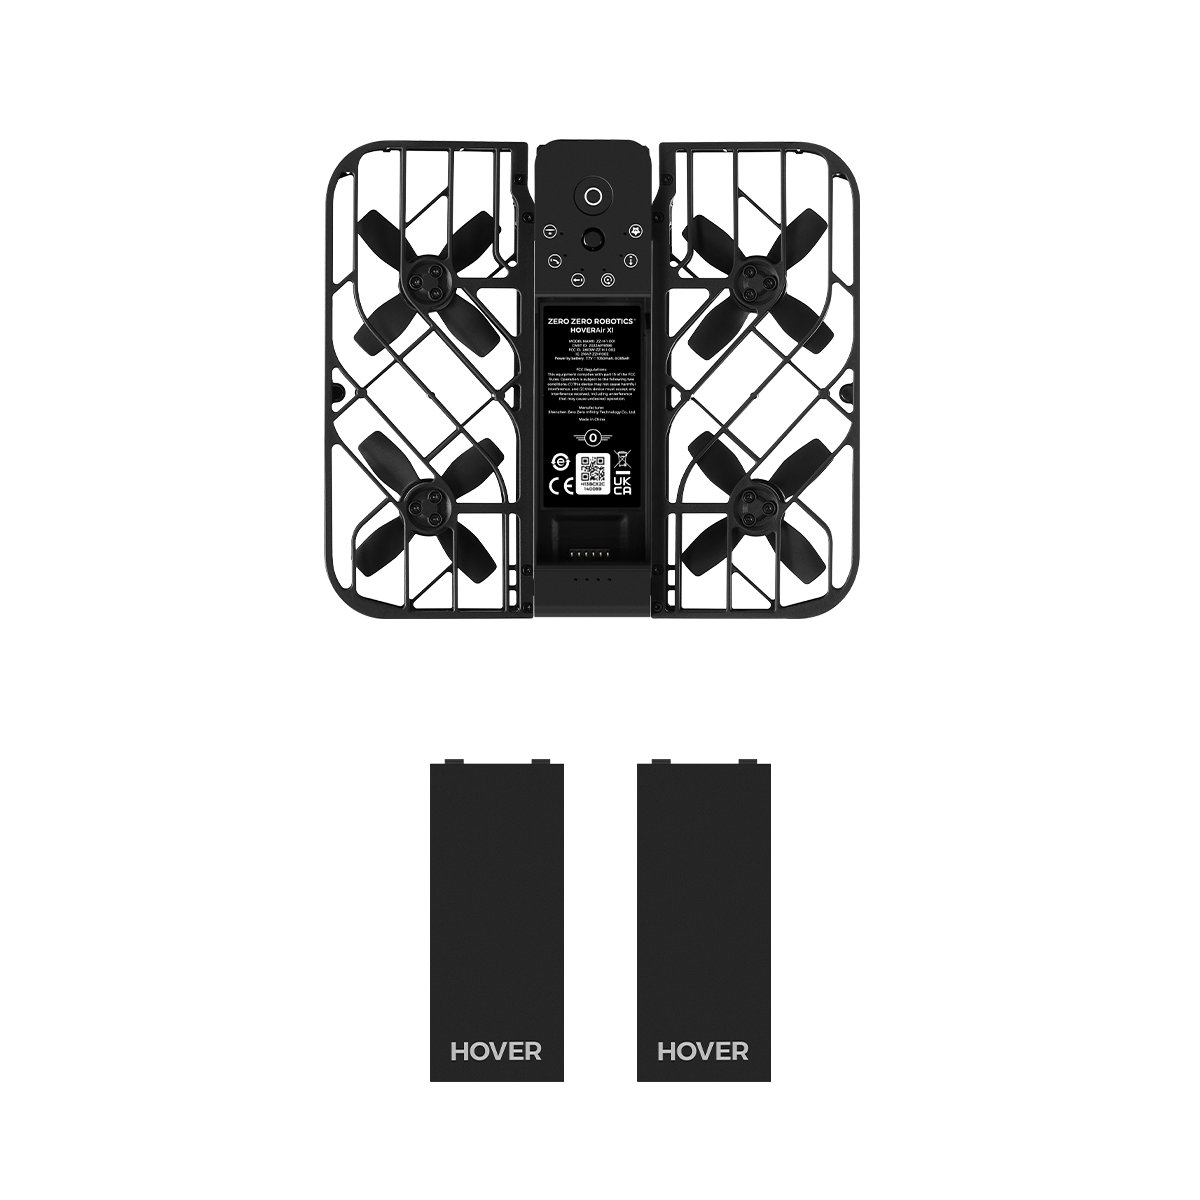 one HOVERAir X1 black and two Batteries